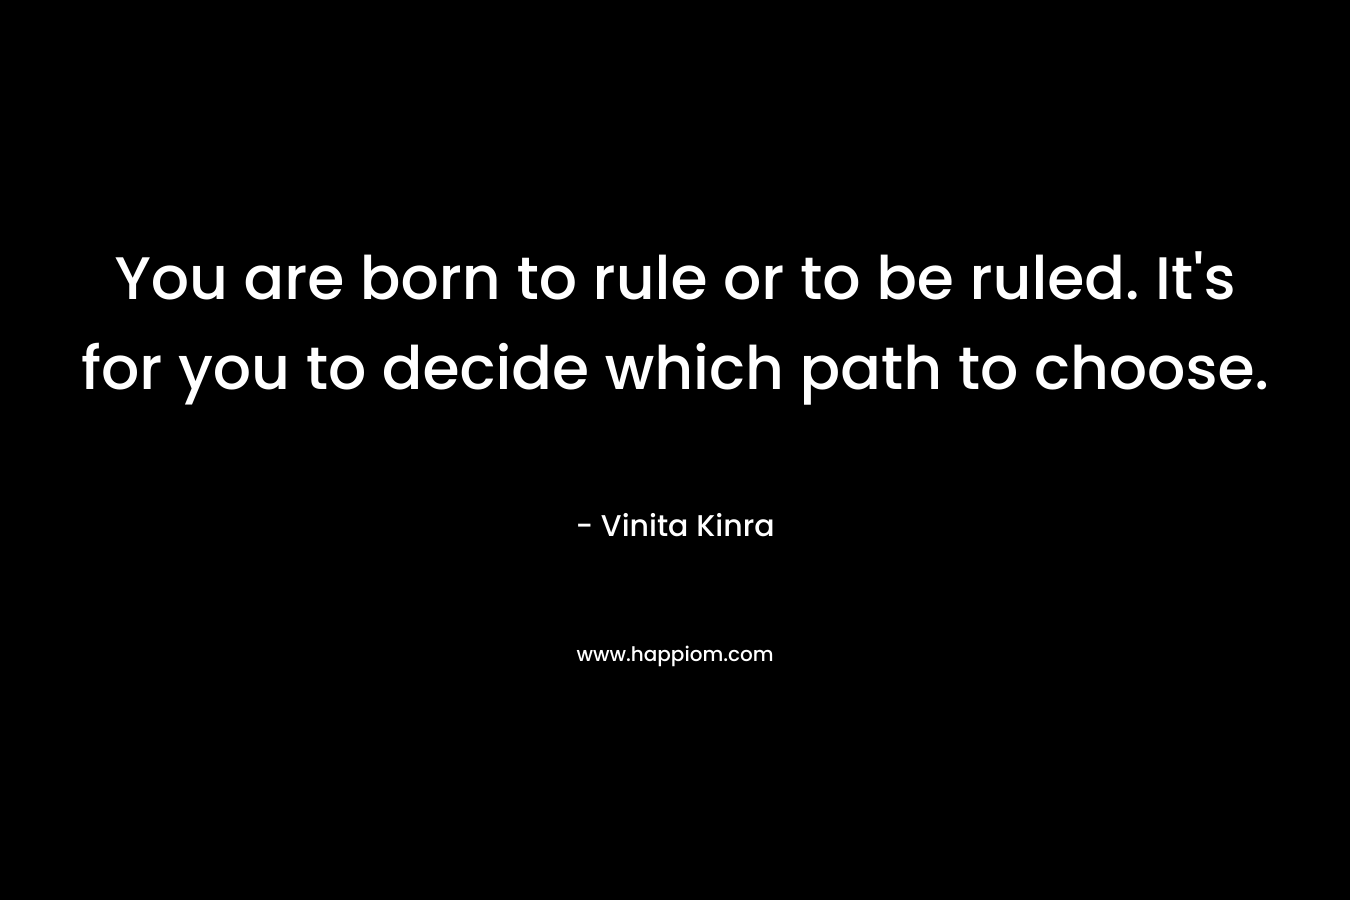 You are born to rule or to be ruled. It’s for you to decide which path to choose. – Vinita Kinra